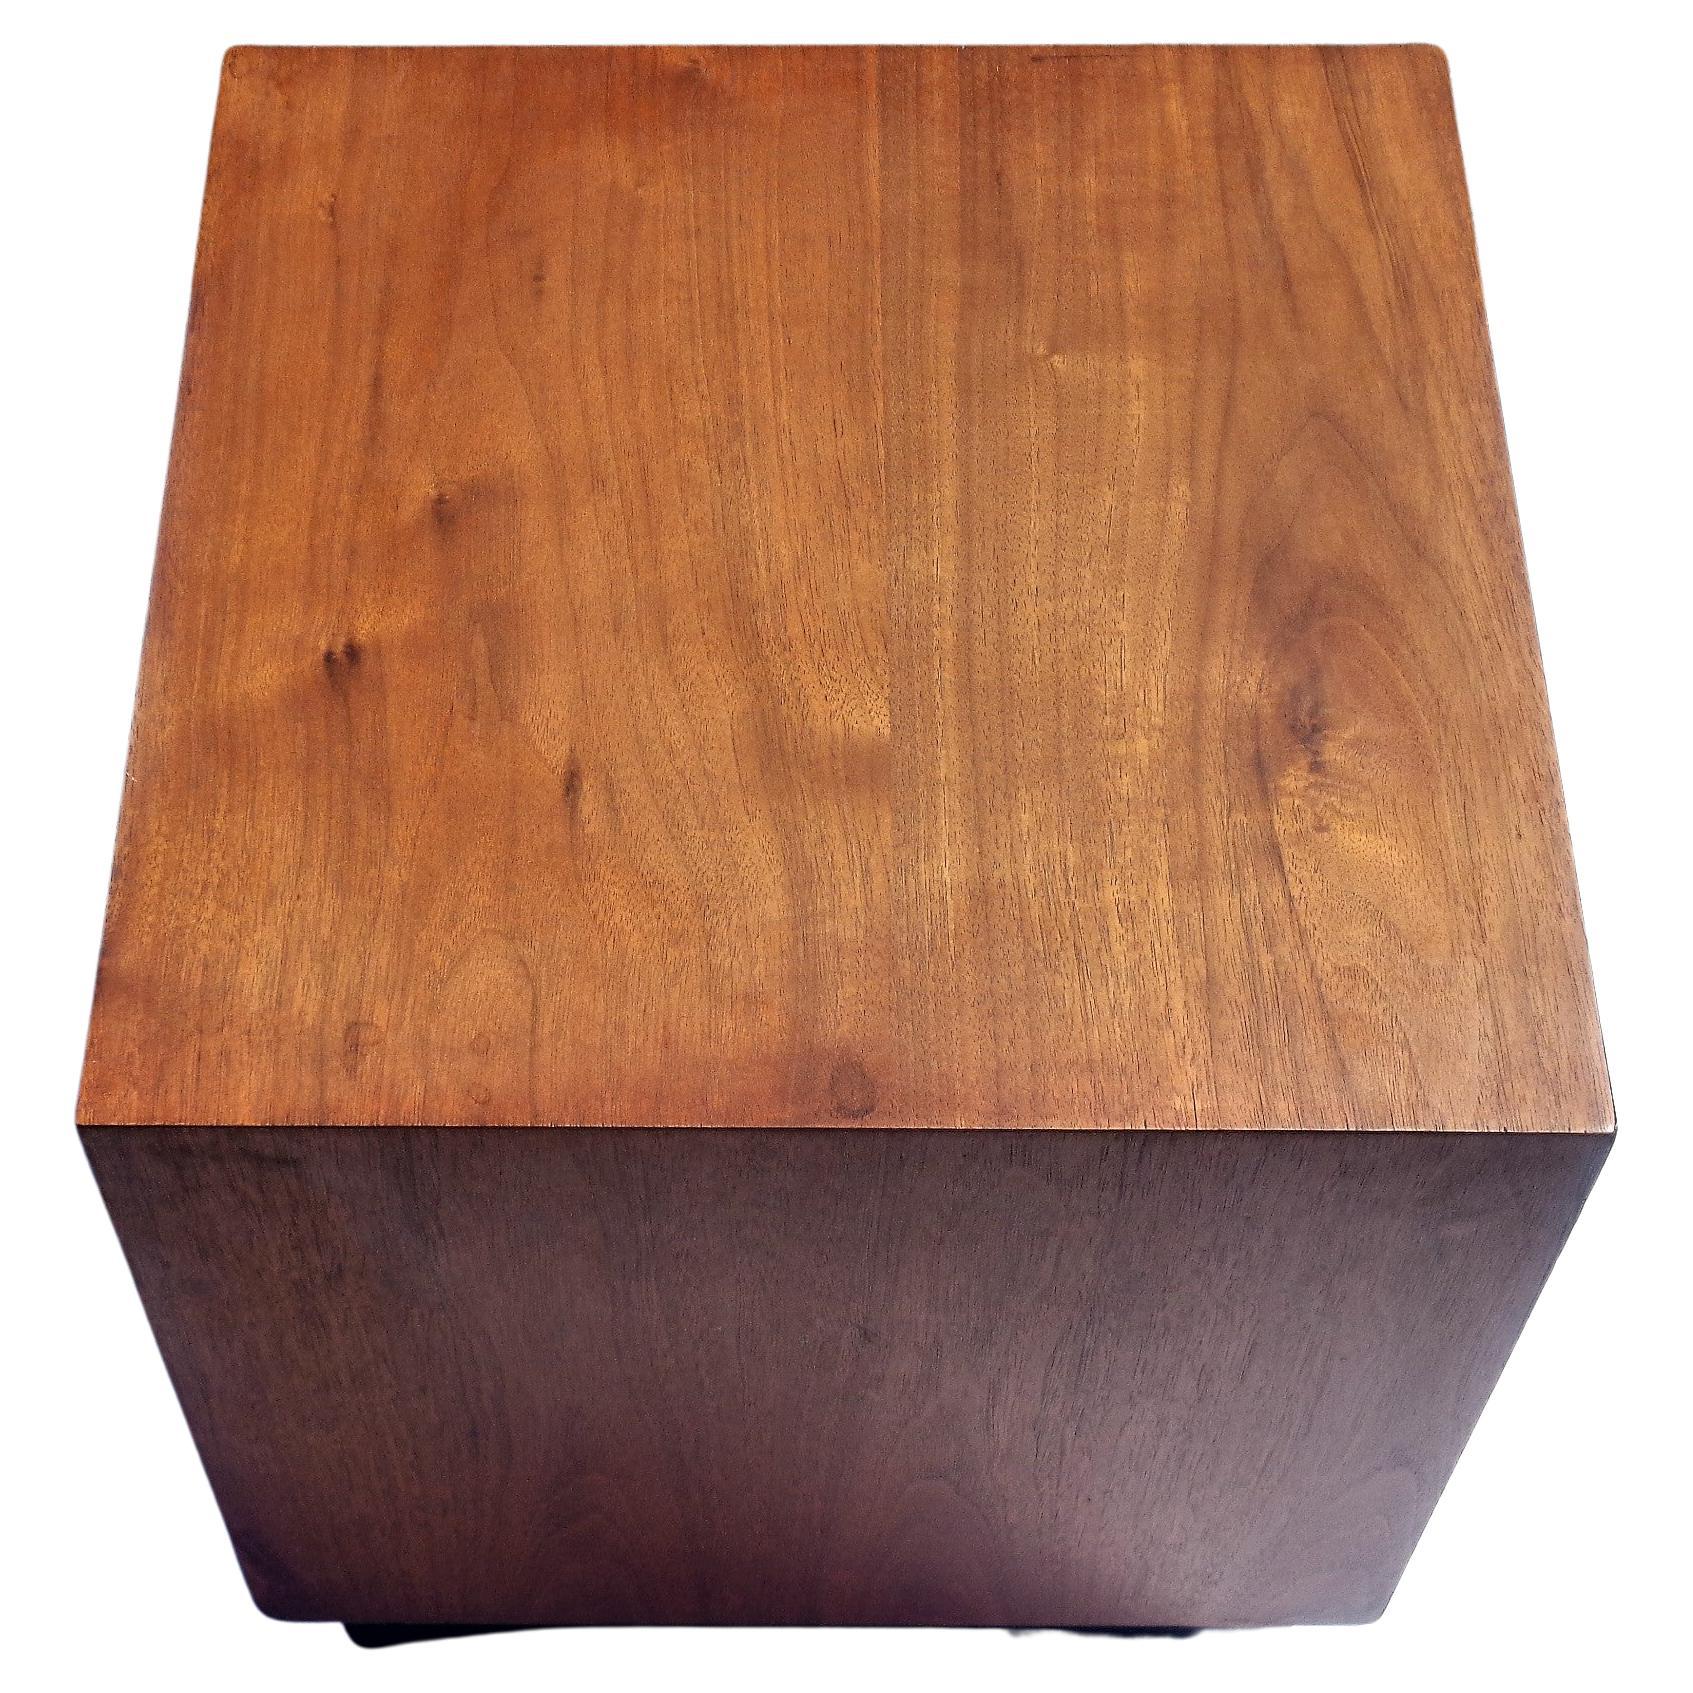 Wood Adrian Pearsall Walnut Floating Cube Table